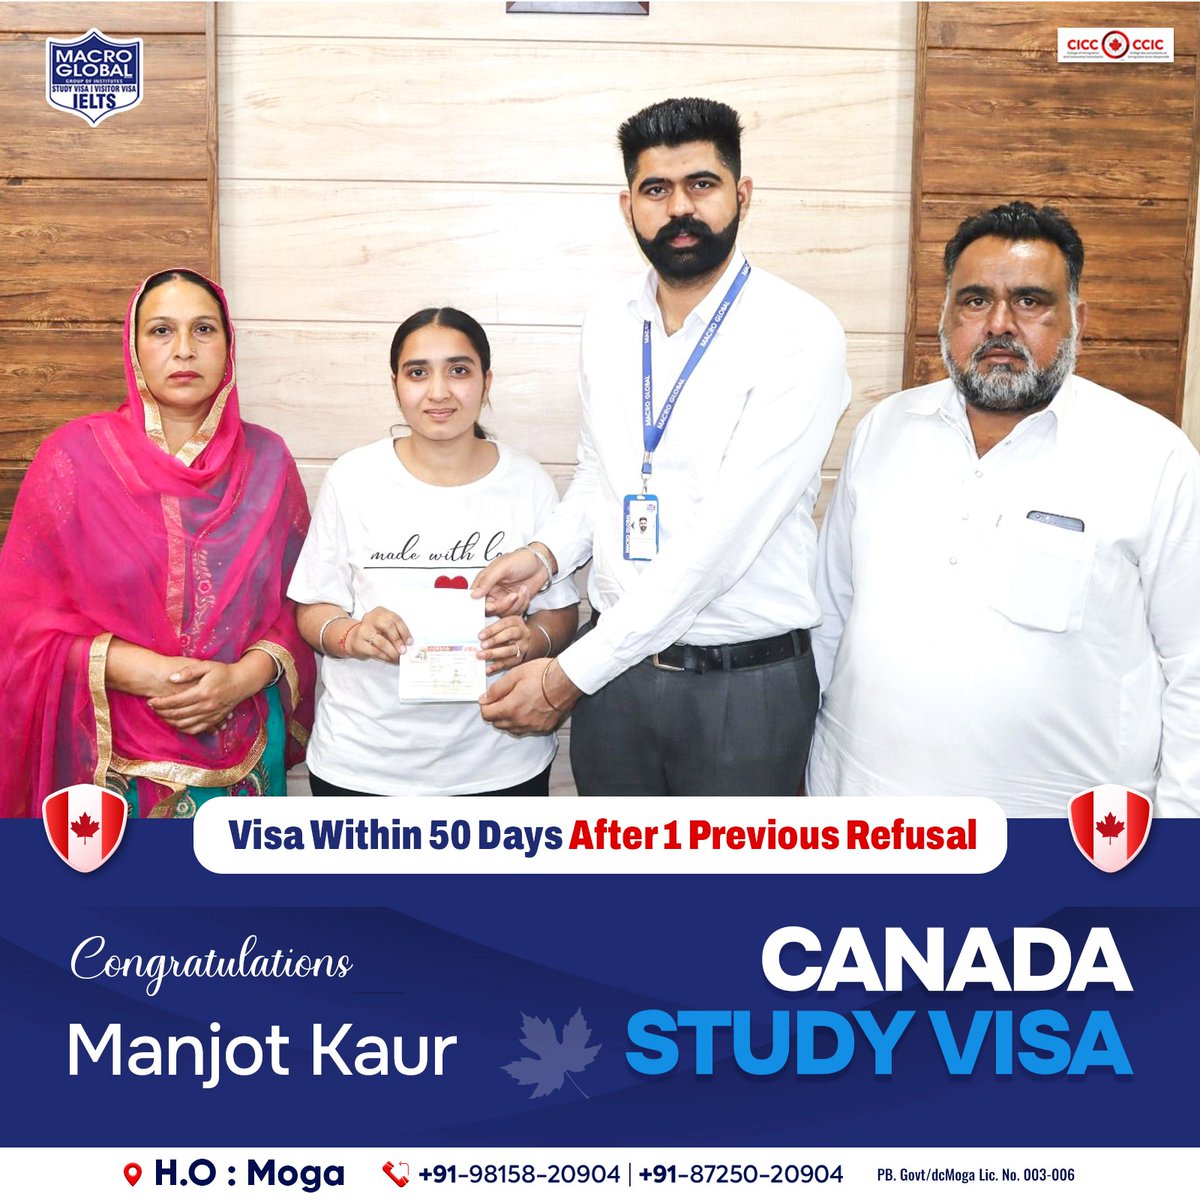 📚 Manjot Kaur's perseverance pays off as she secures her Canada Study Visa within 50 days after facing 1 Previous Refusal, guided by Macro Global! 🎉🍁

#MacroGlobal #GurmilapSinghDalla #Canada #Canadastudyvisa #canadaopenworkpermit #spousevisa #Visitorvisa #Visa #IELTS